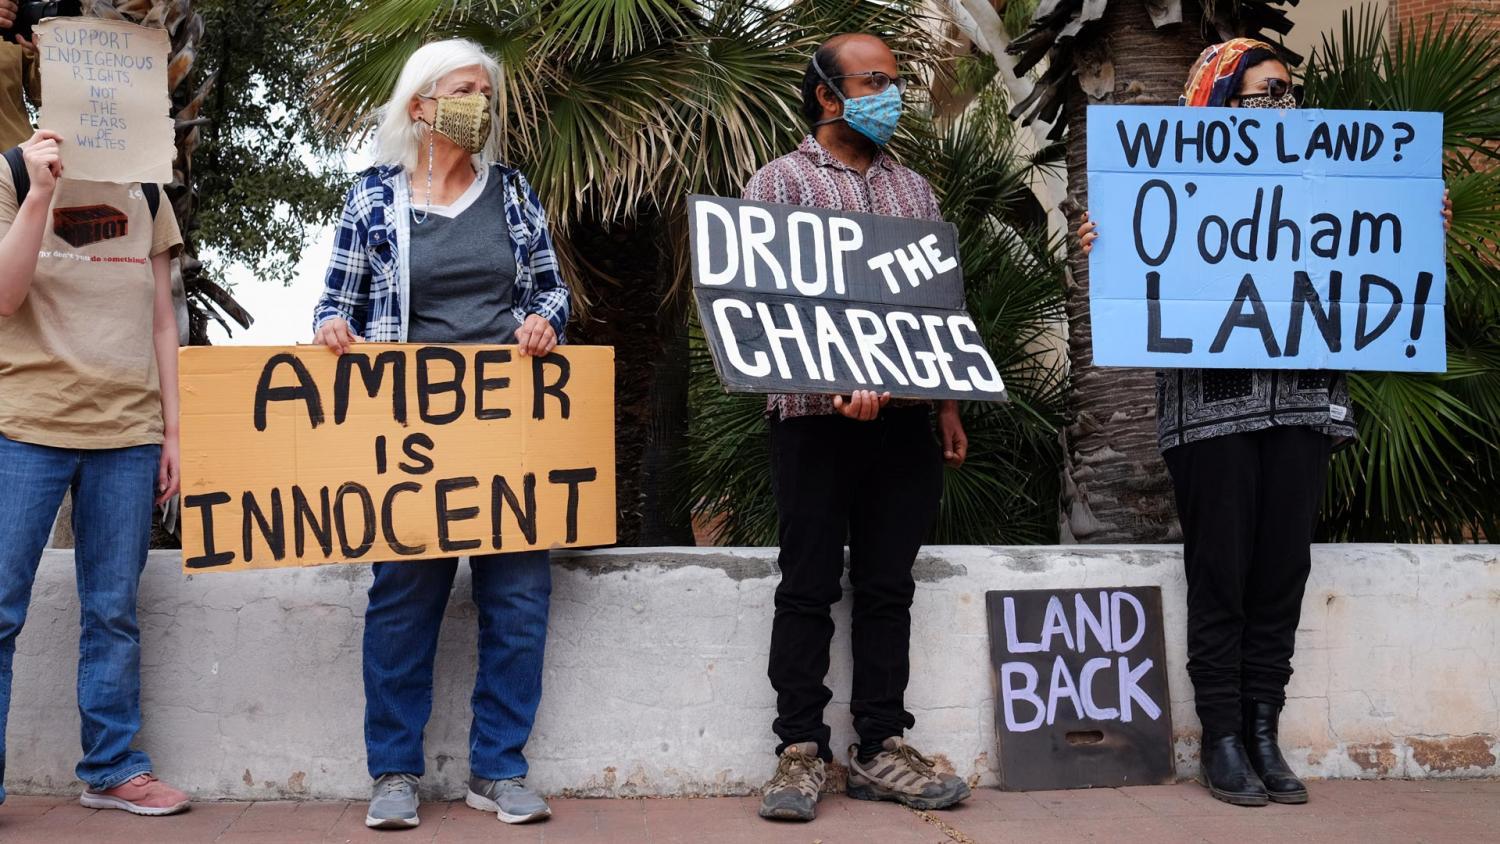 Supporters of Amber Ortega hold signs of support during a rally across the street from the federal courthouse in downtown Tucson on Nov. 23, 2021.